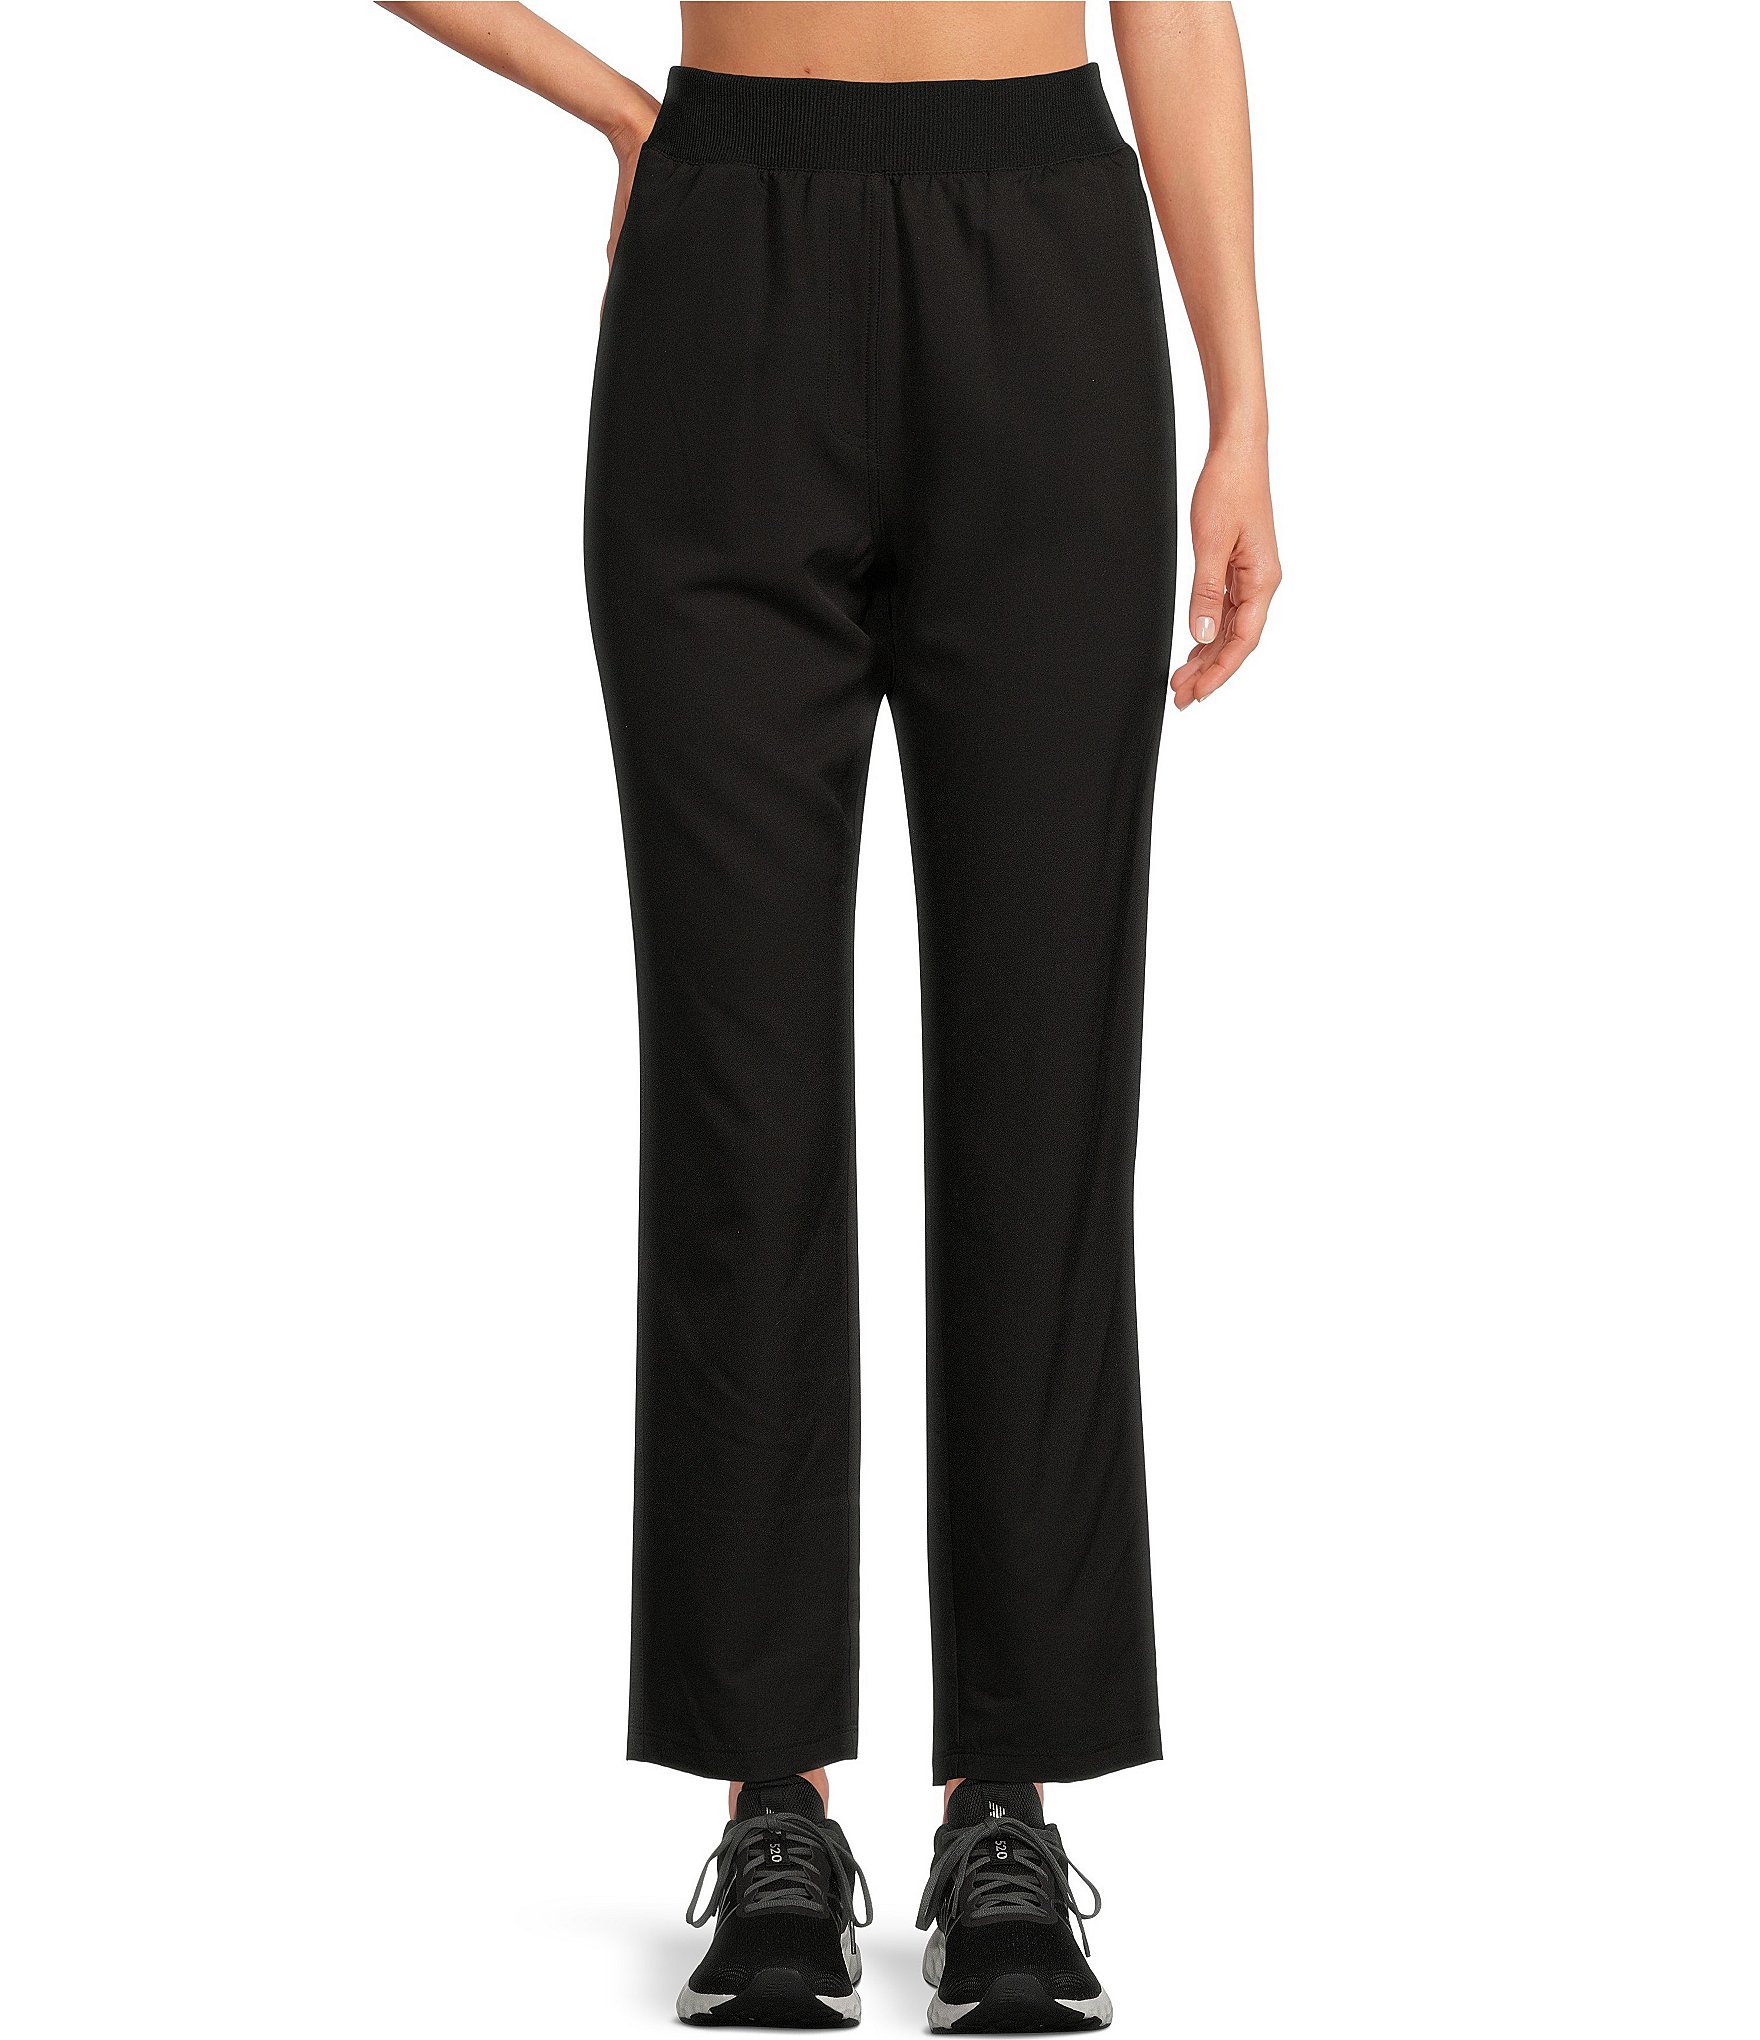 TILLEY Stretch Woven Pull-On Jogger Pants